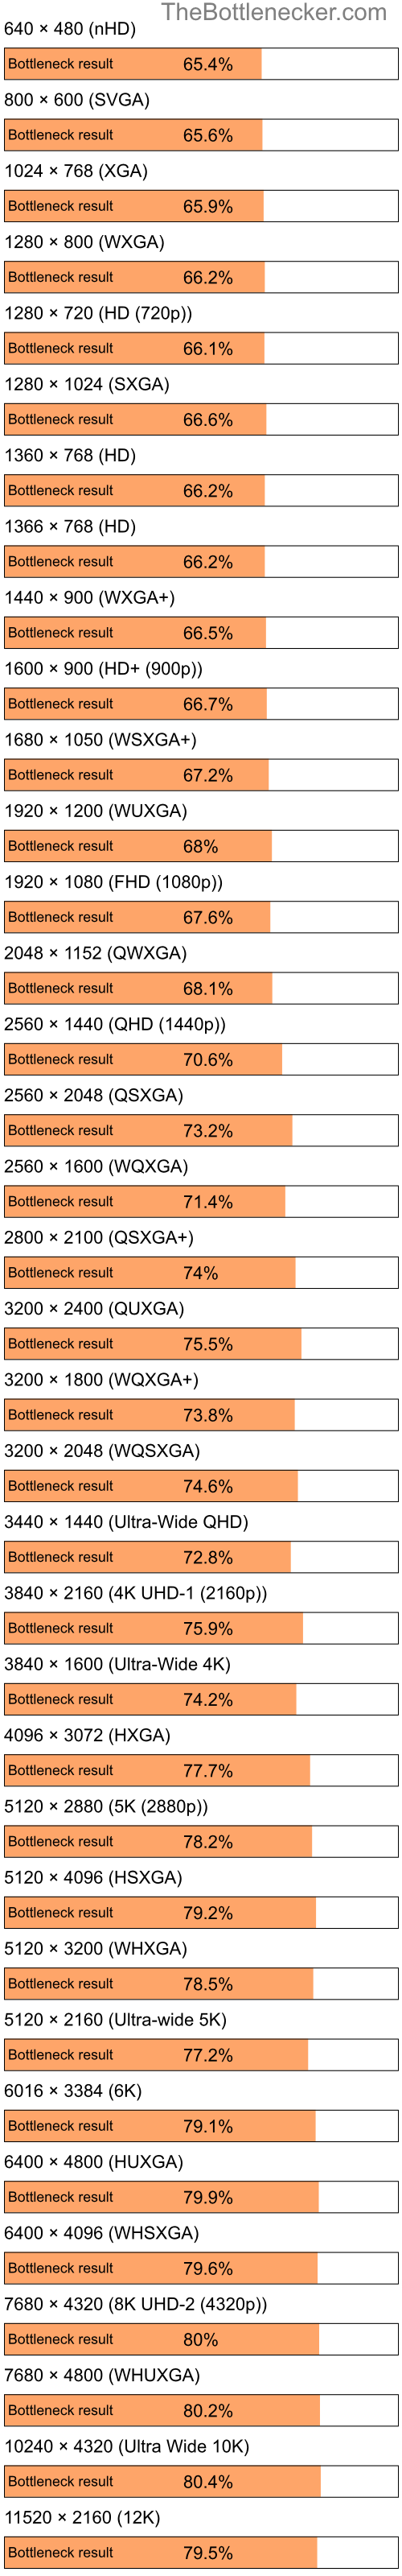 Bottleneck results by resolution for Intel Pentium 4 and NVIDIA GeForce 6600 LE in Processor Intense Tasks